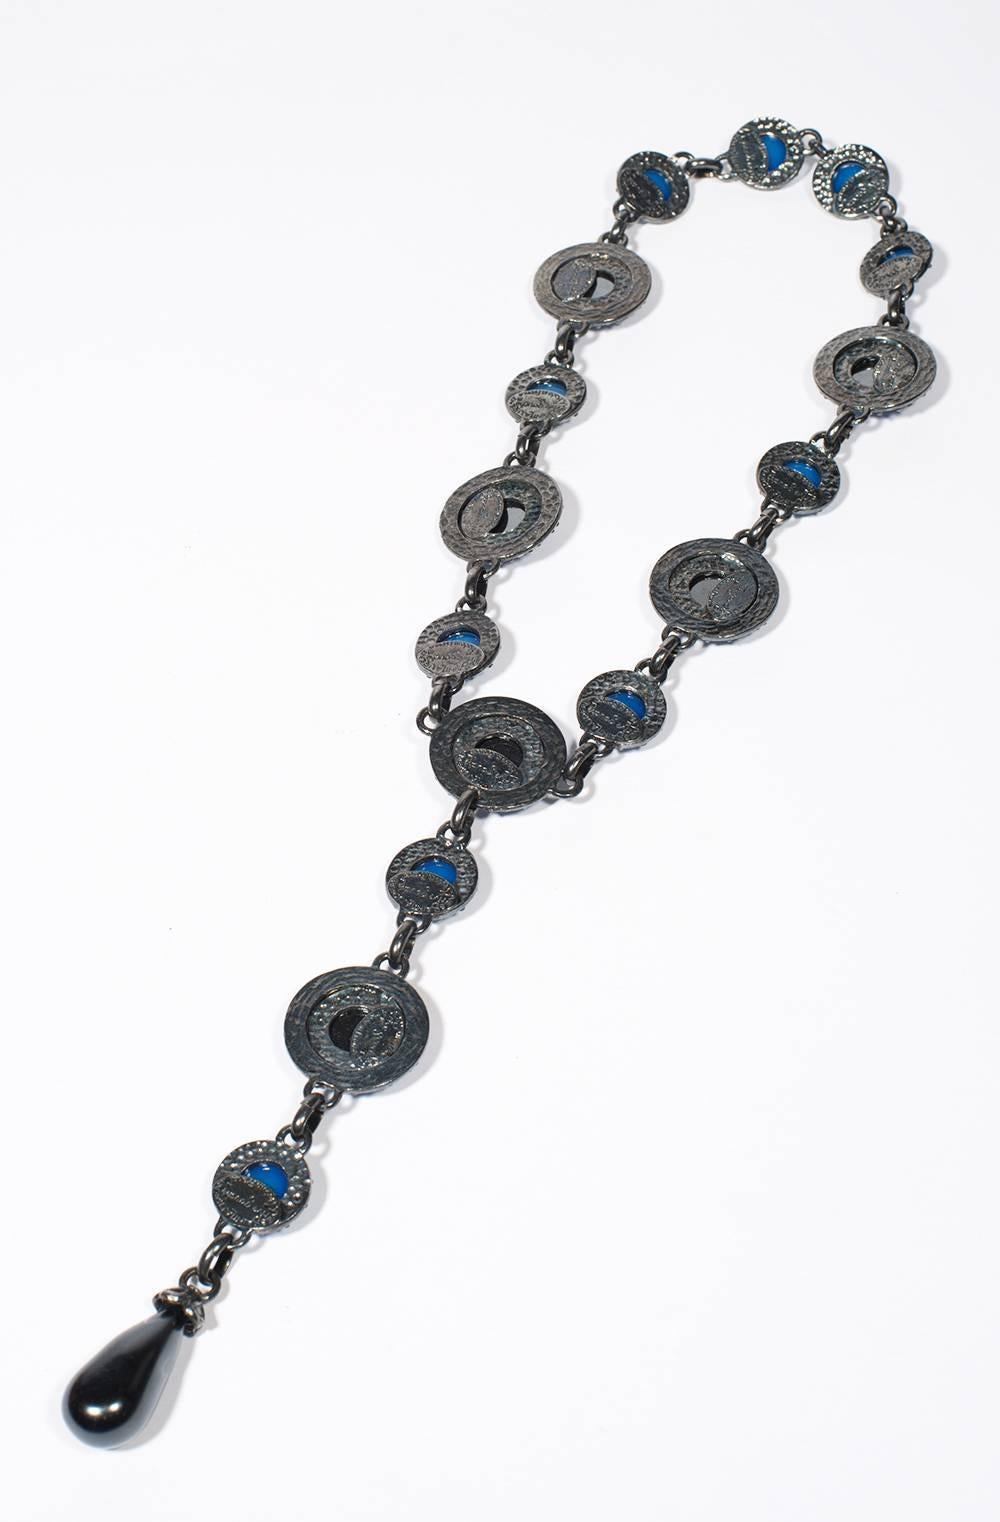 Yves Saint Laurent Rive Gauche Divine Long Necklace  circa 1990/2000

Gorgeous long necklace composed rond pattern with strass and hematite

Total length with pendant 34 cm , and without 20cm 

very small impact on the drop 